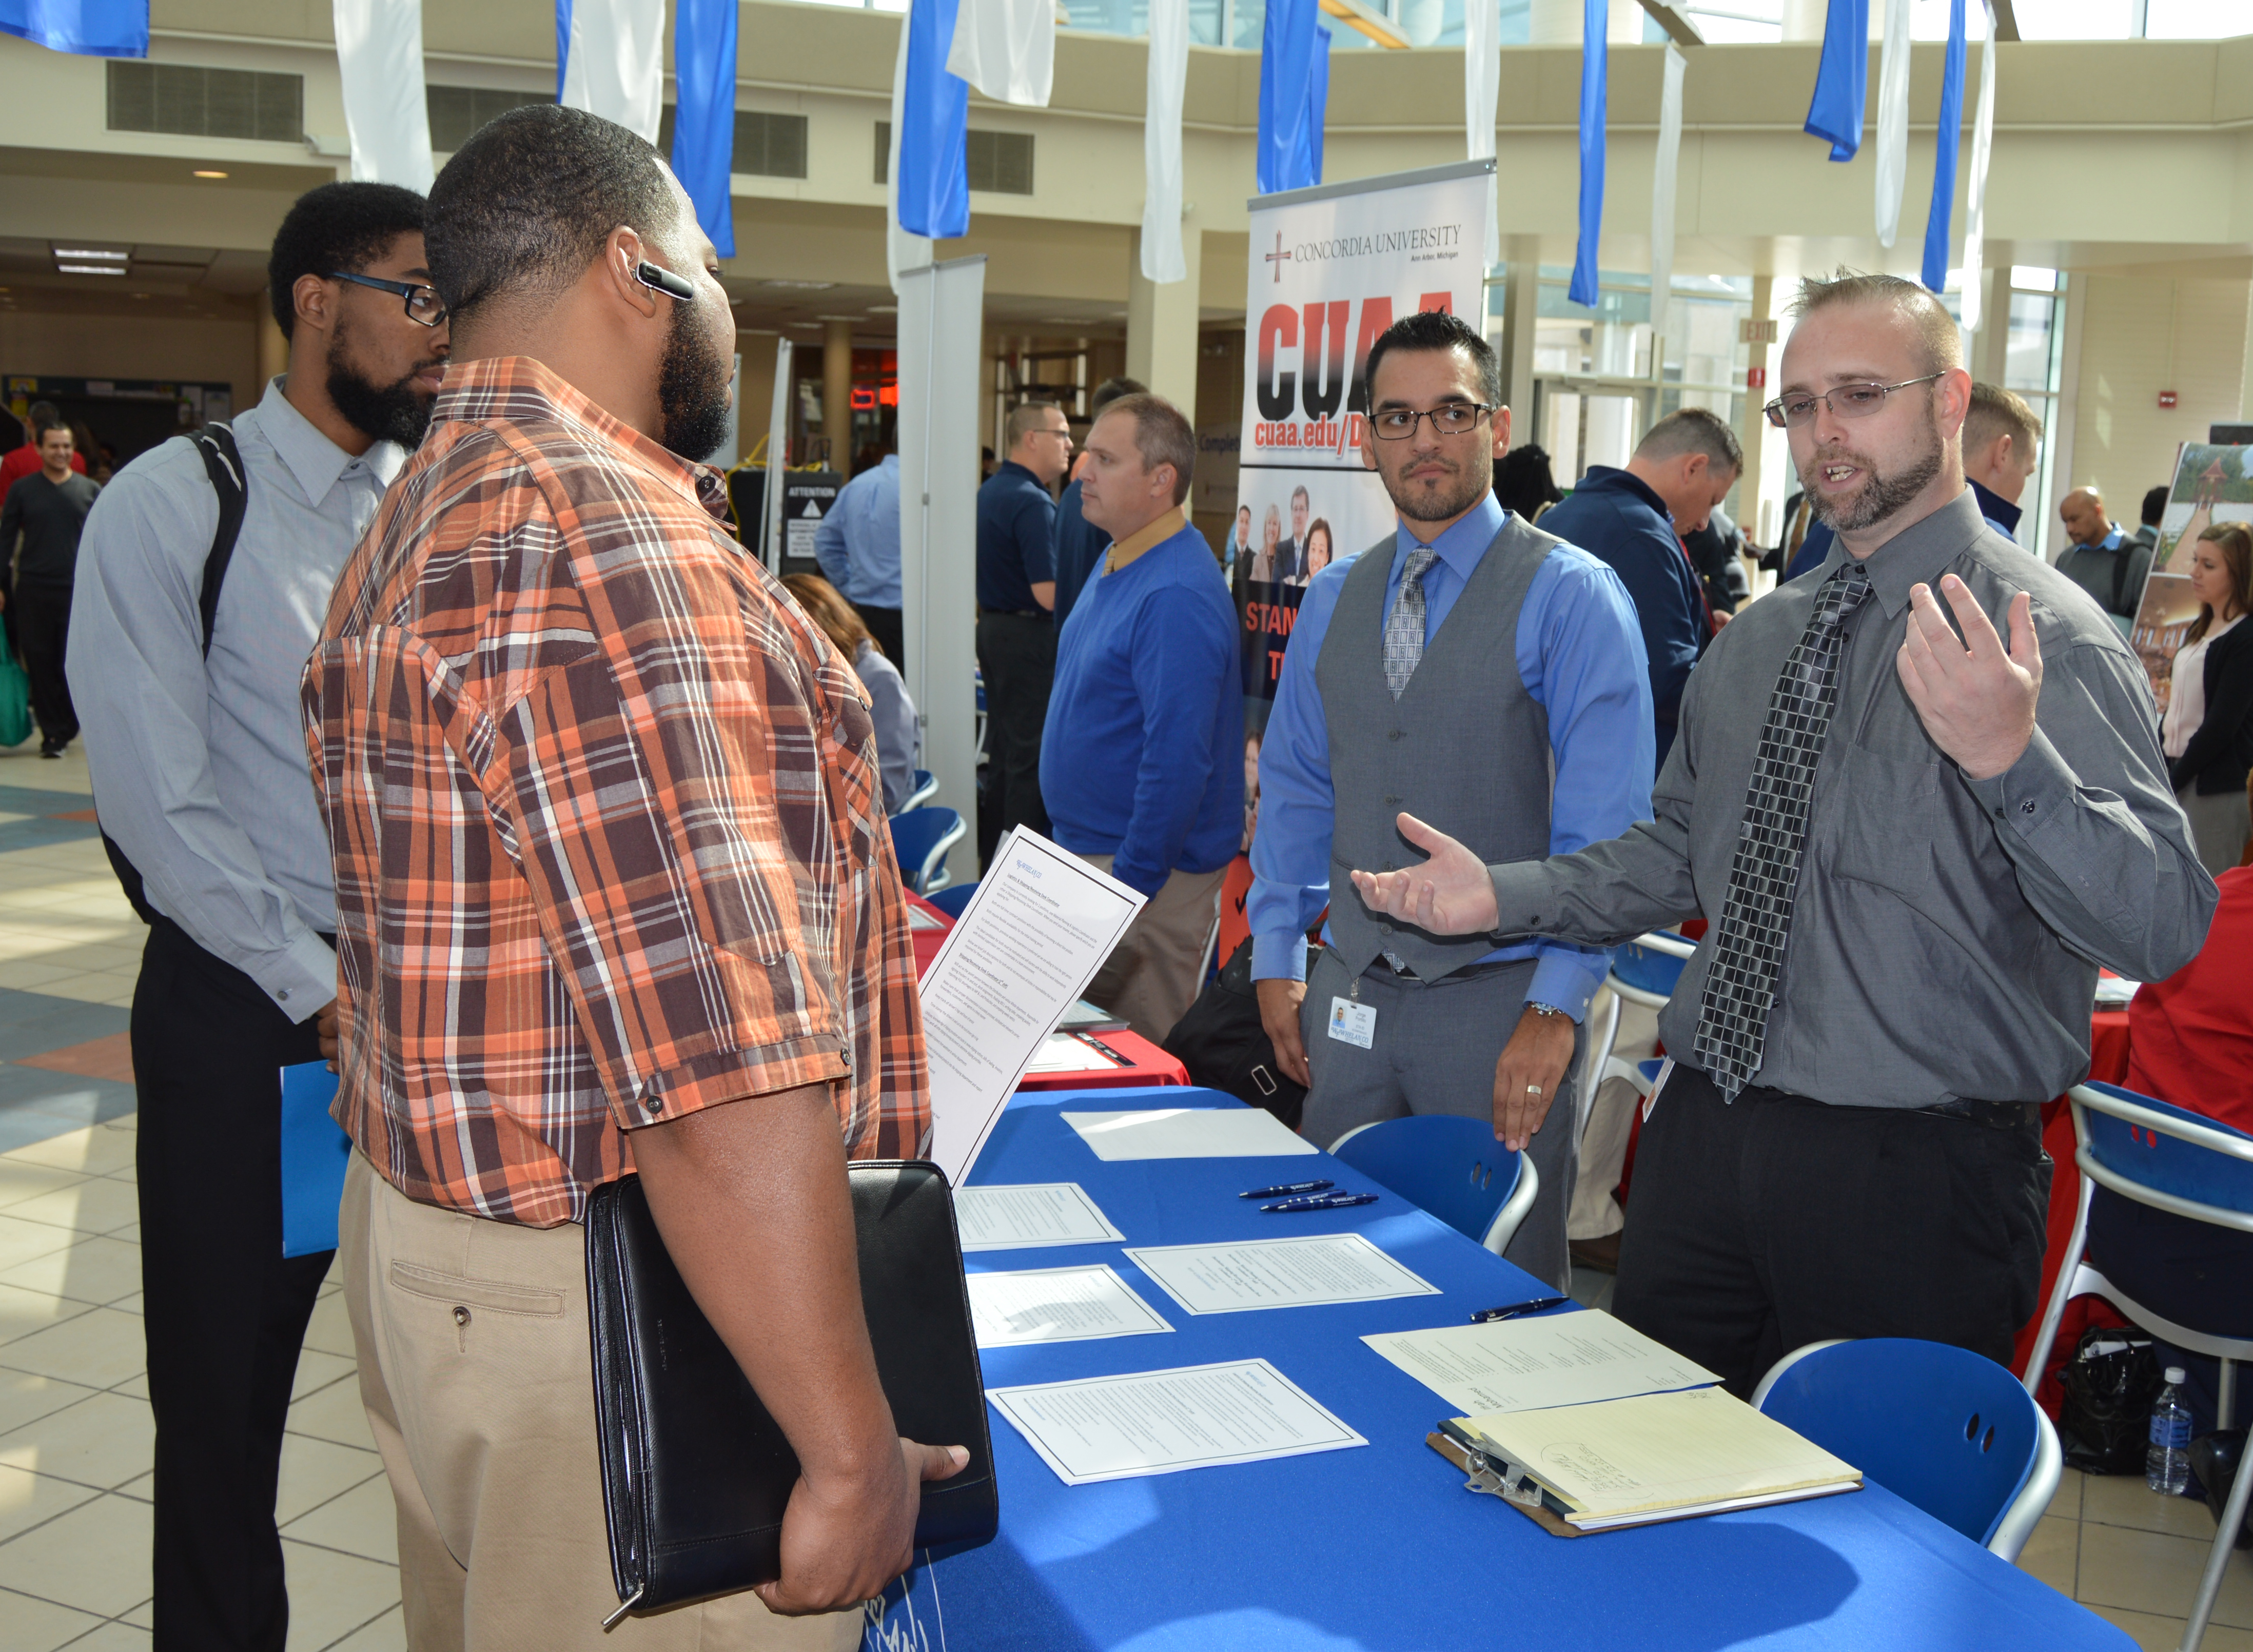 Two men talking to employers at career fair